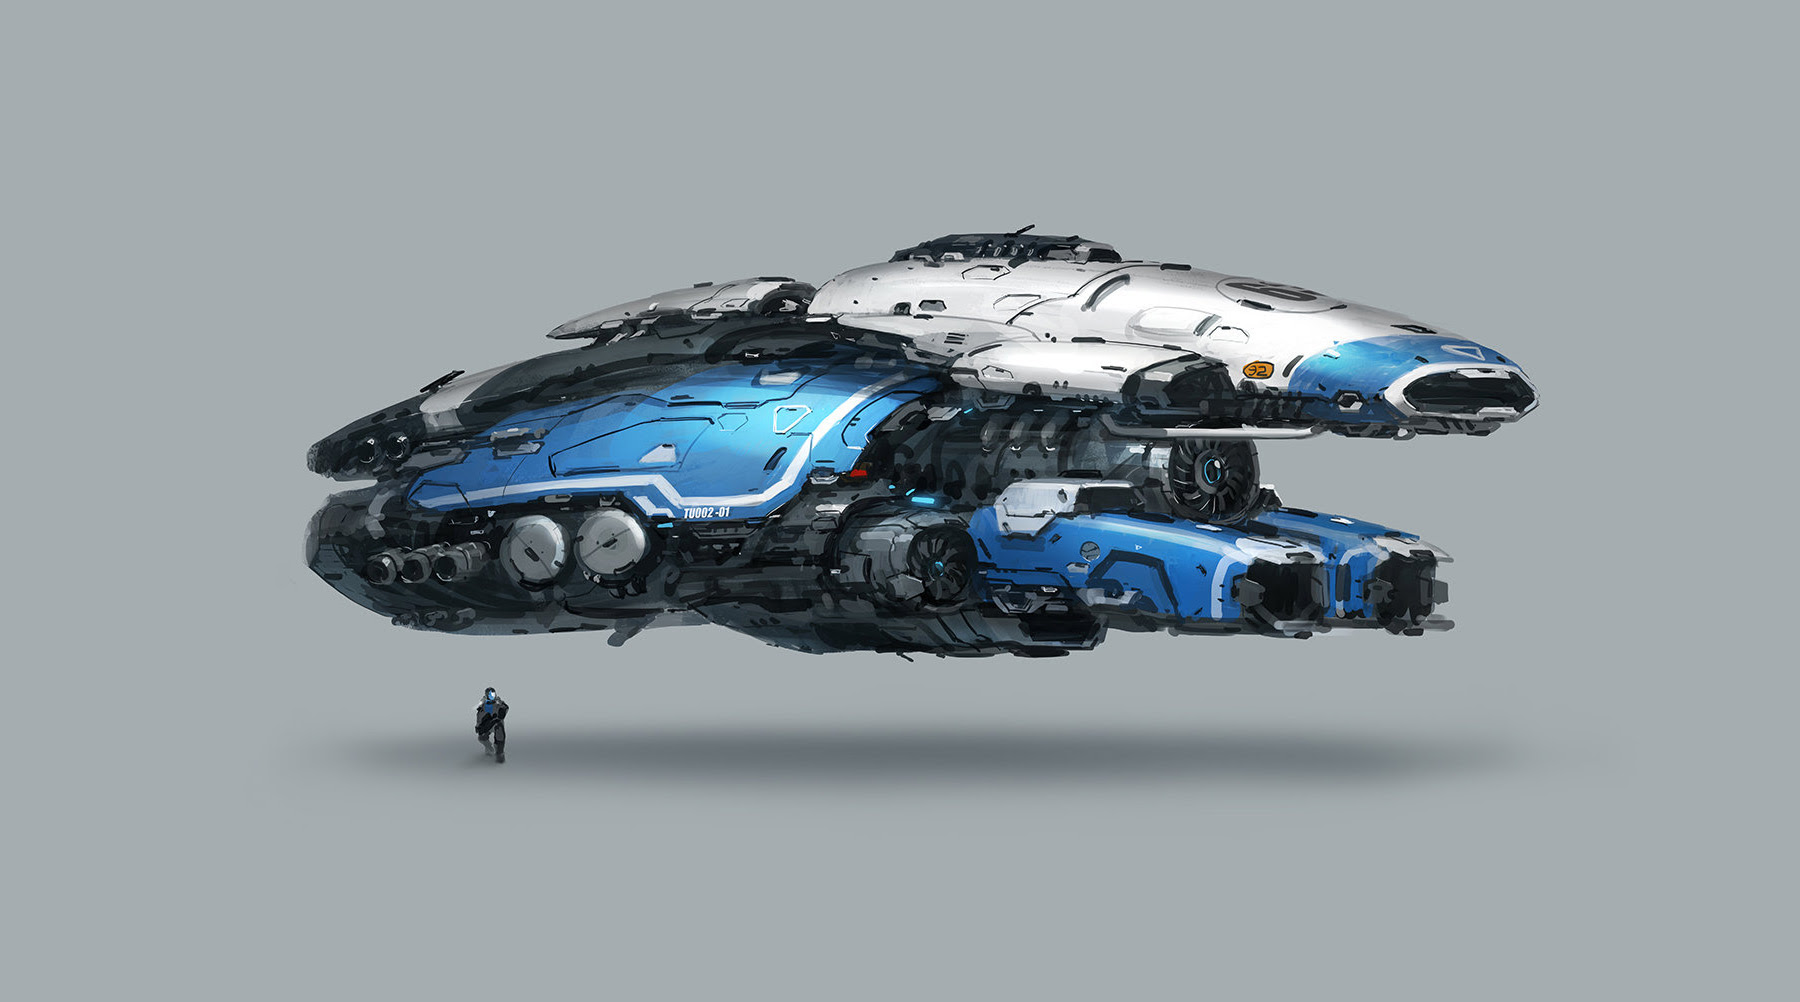 concept ships: Spaceships by J.C Park